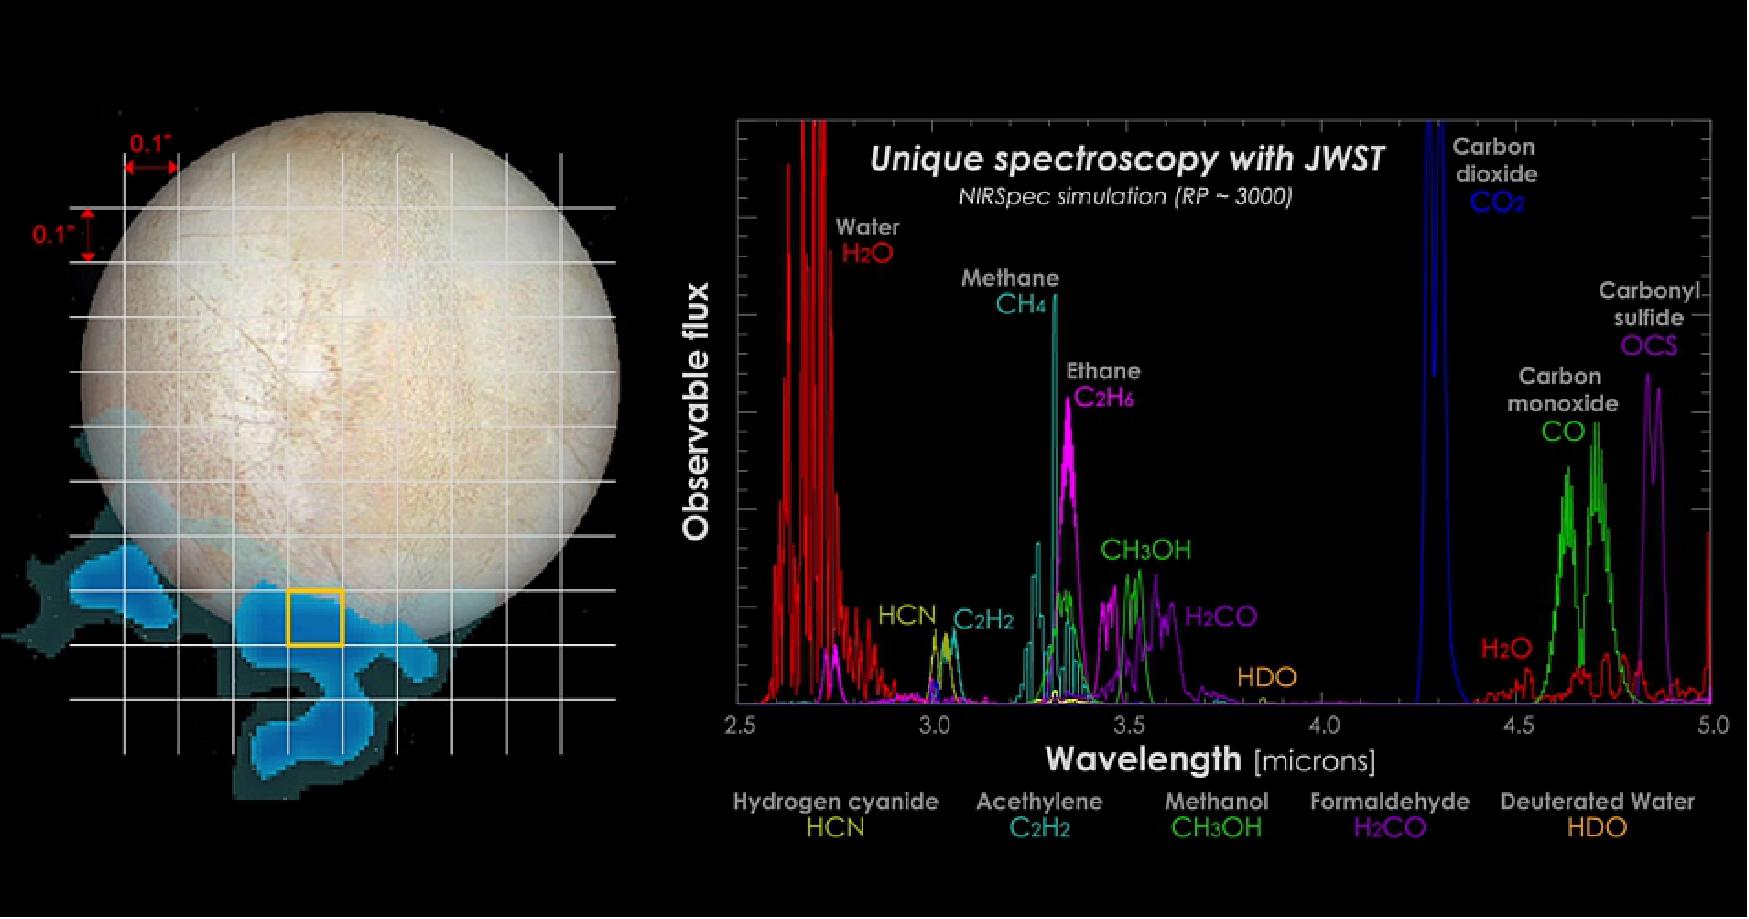 Figure 53: Possible spectroscopy results from one of Europa's water plumes. This is an example of the data the Webb telescope could return (image credit: NASA-GSFC/SVS, Hubble Space Telescope, Stefanie Milam, Geronimo Villanueva)